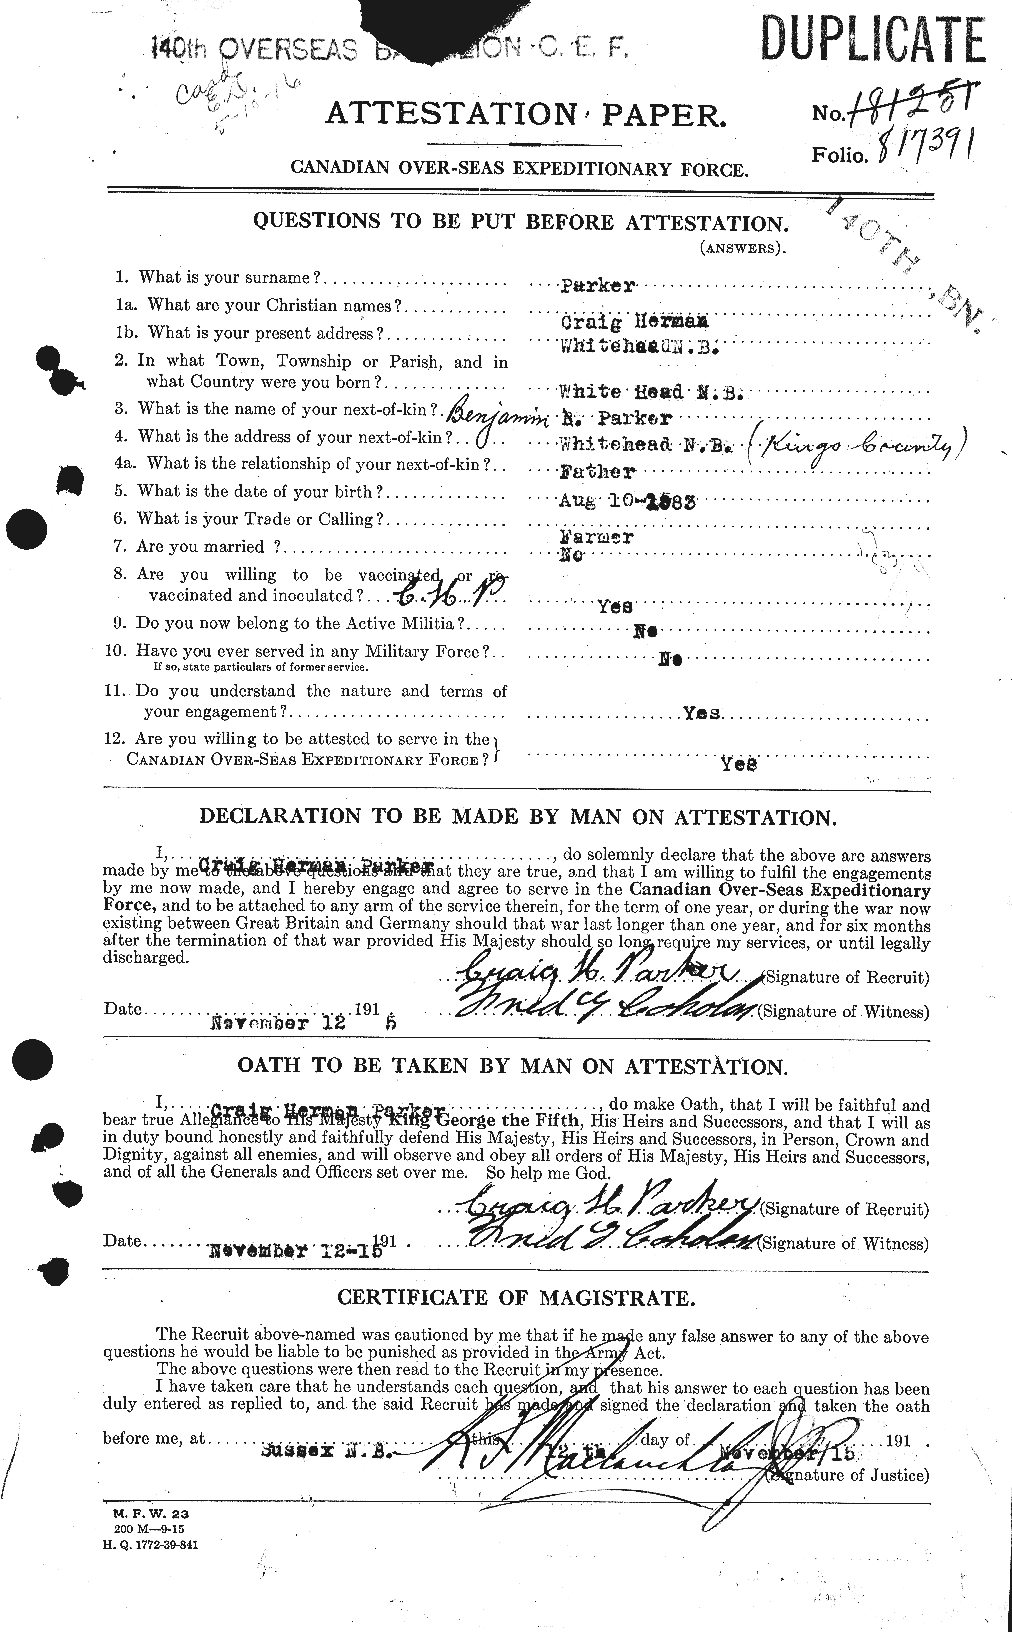 Personnel Records of the First World War - CEF 565098a